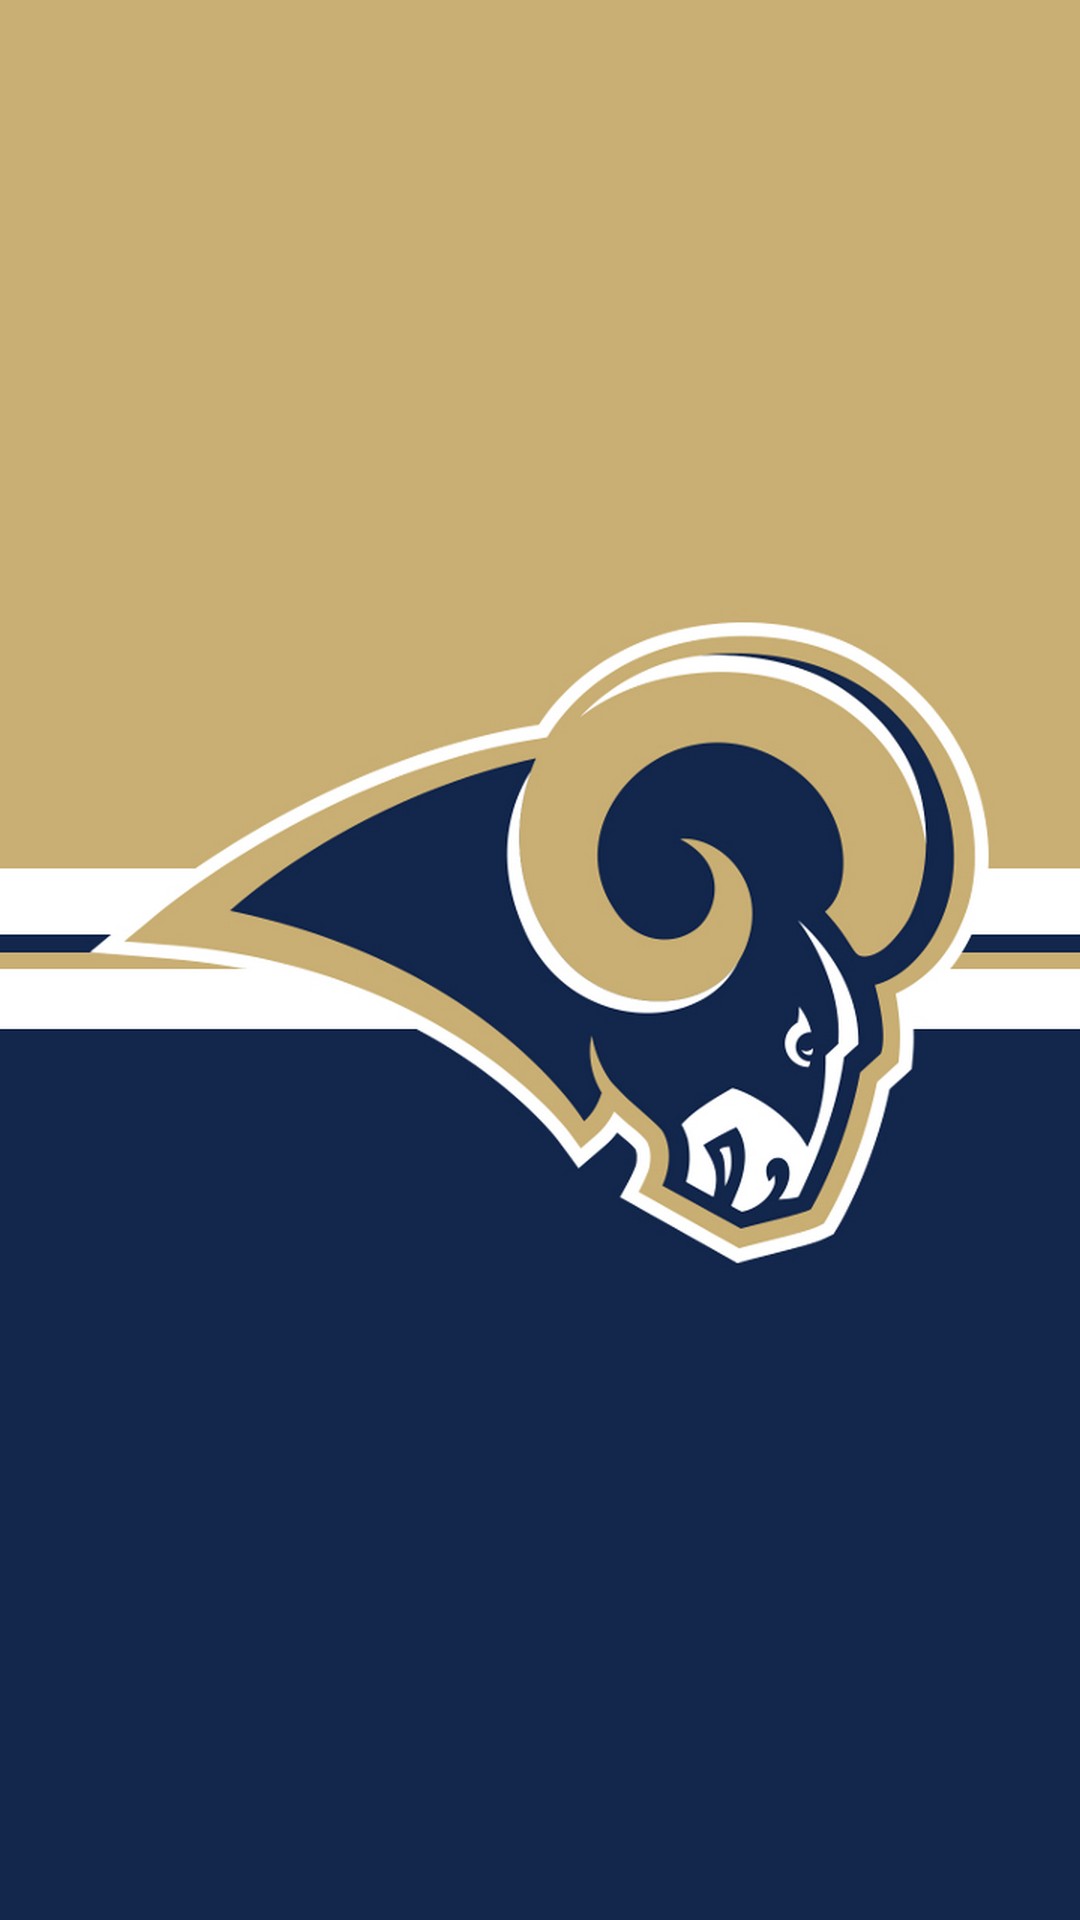 Los Angeles Rams iPhone XR Wallpaper with high-resolution 1080x1920 pixel. Download and set as wallpaper for Desktop Computer, Apple iPhone X, XS Max, XR, 8, 7, 6, SE, iPad, Android